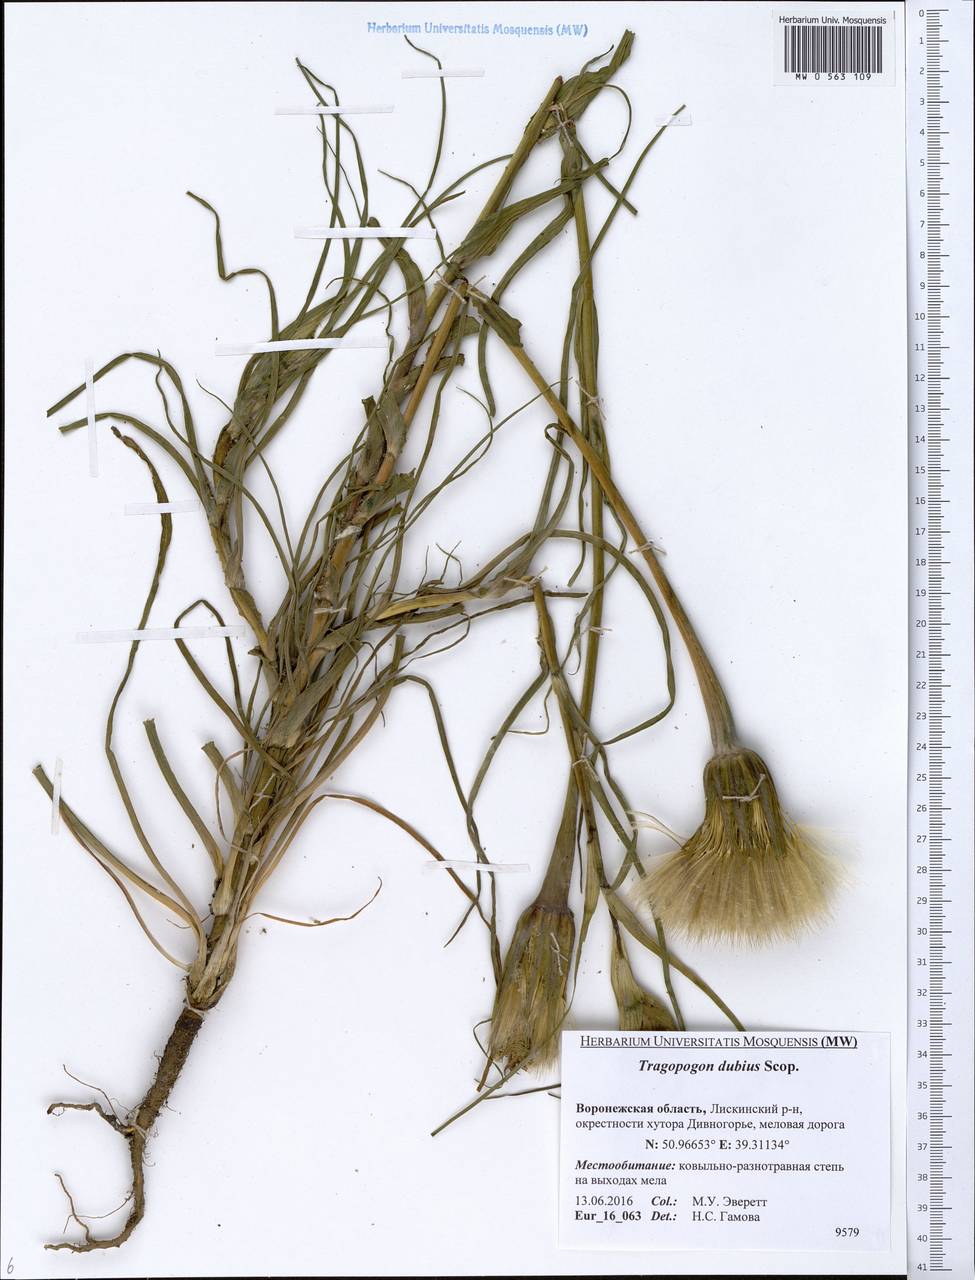 Tragopogon dubius Scop., Eastern Europe, Central forest-and-steppe region (E6) (Russia)